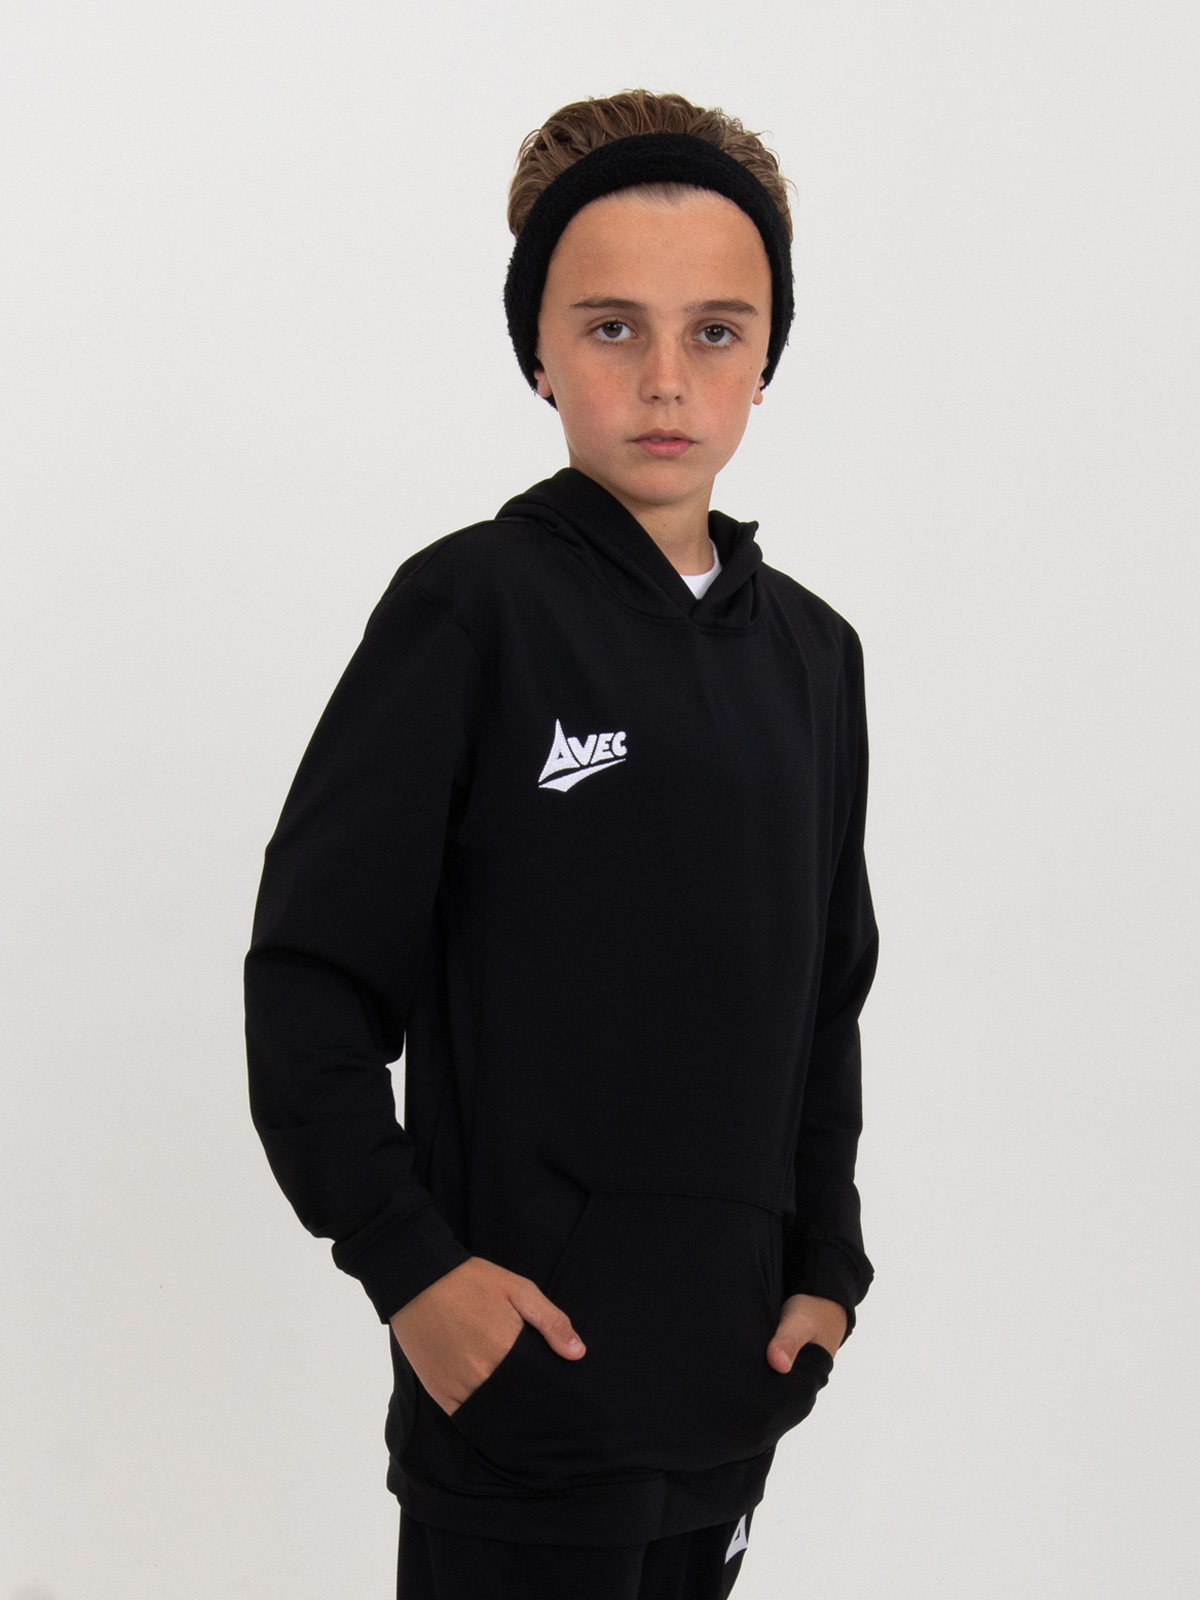 a boy is wearing a plain black hoody with a pouch